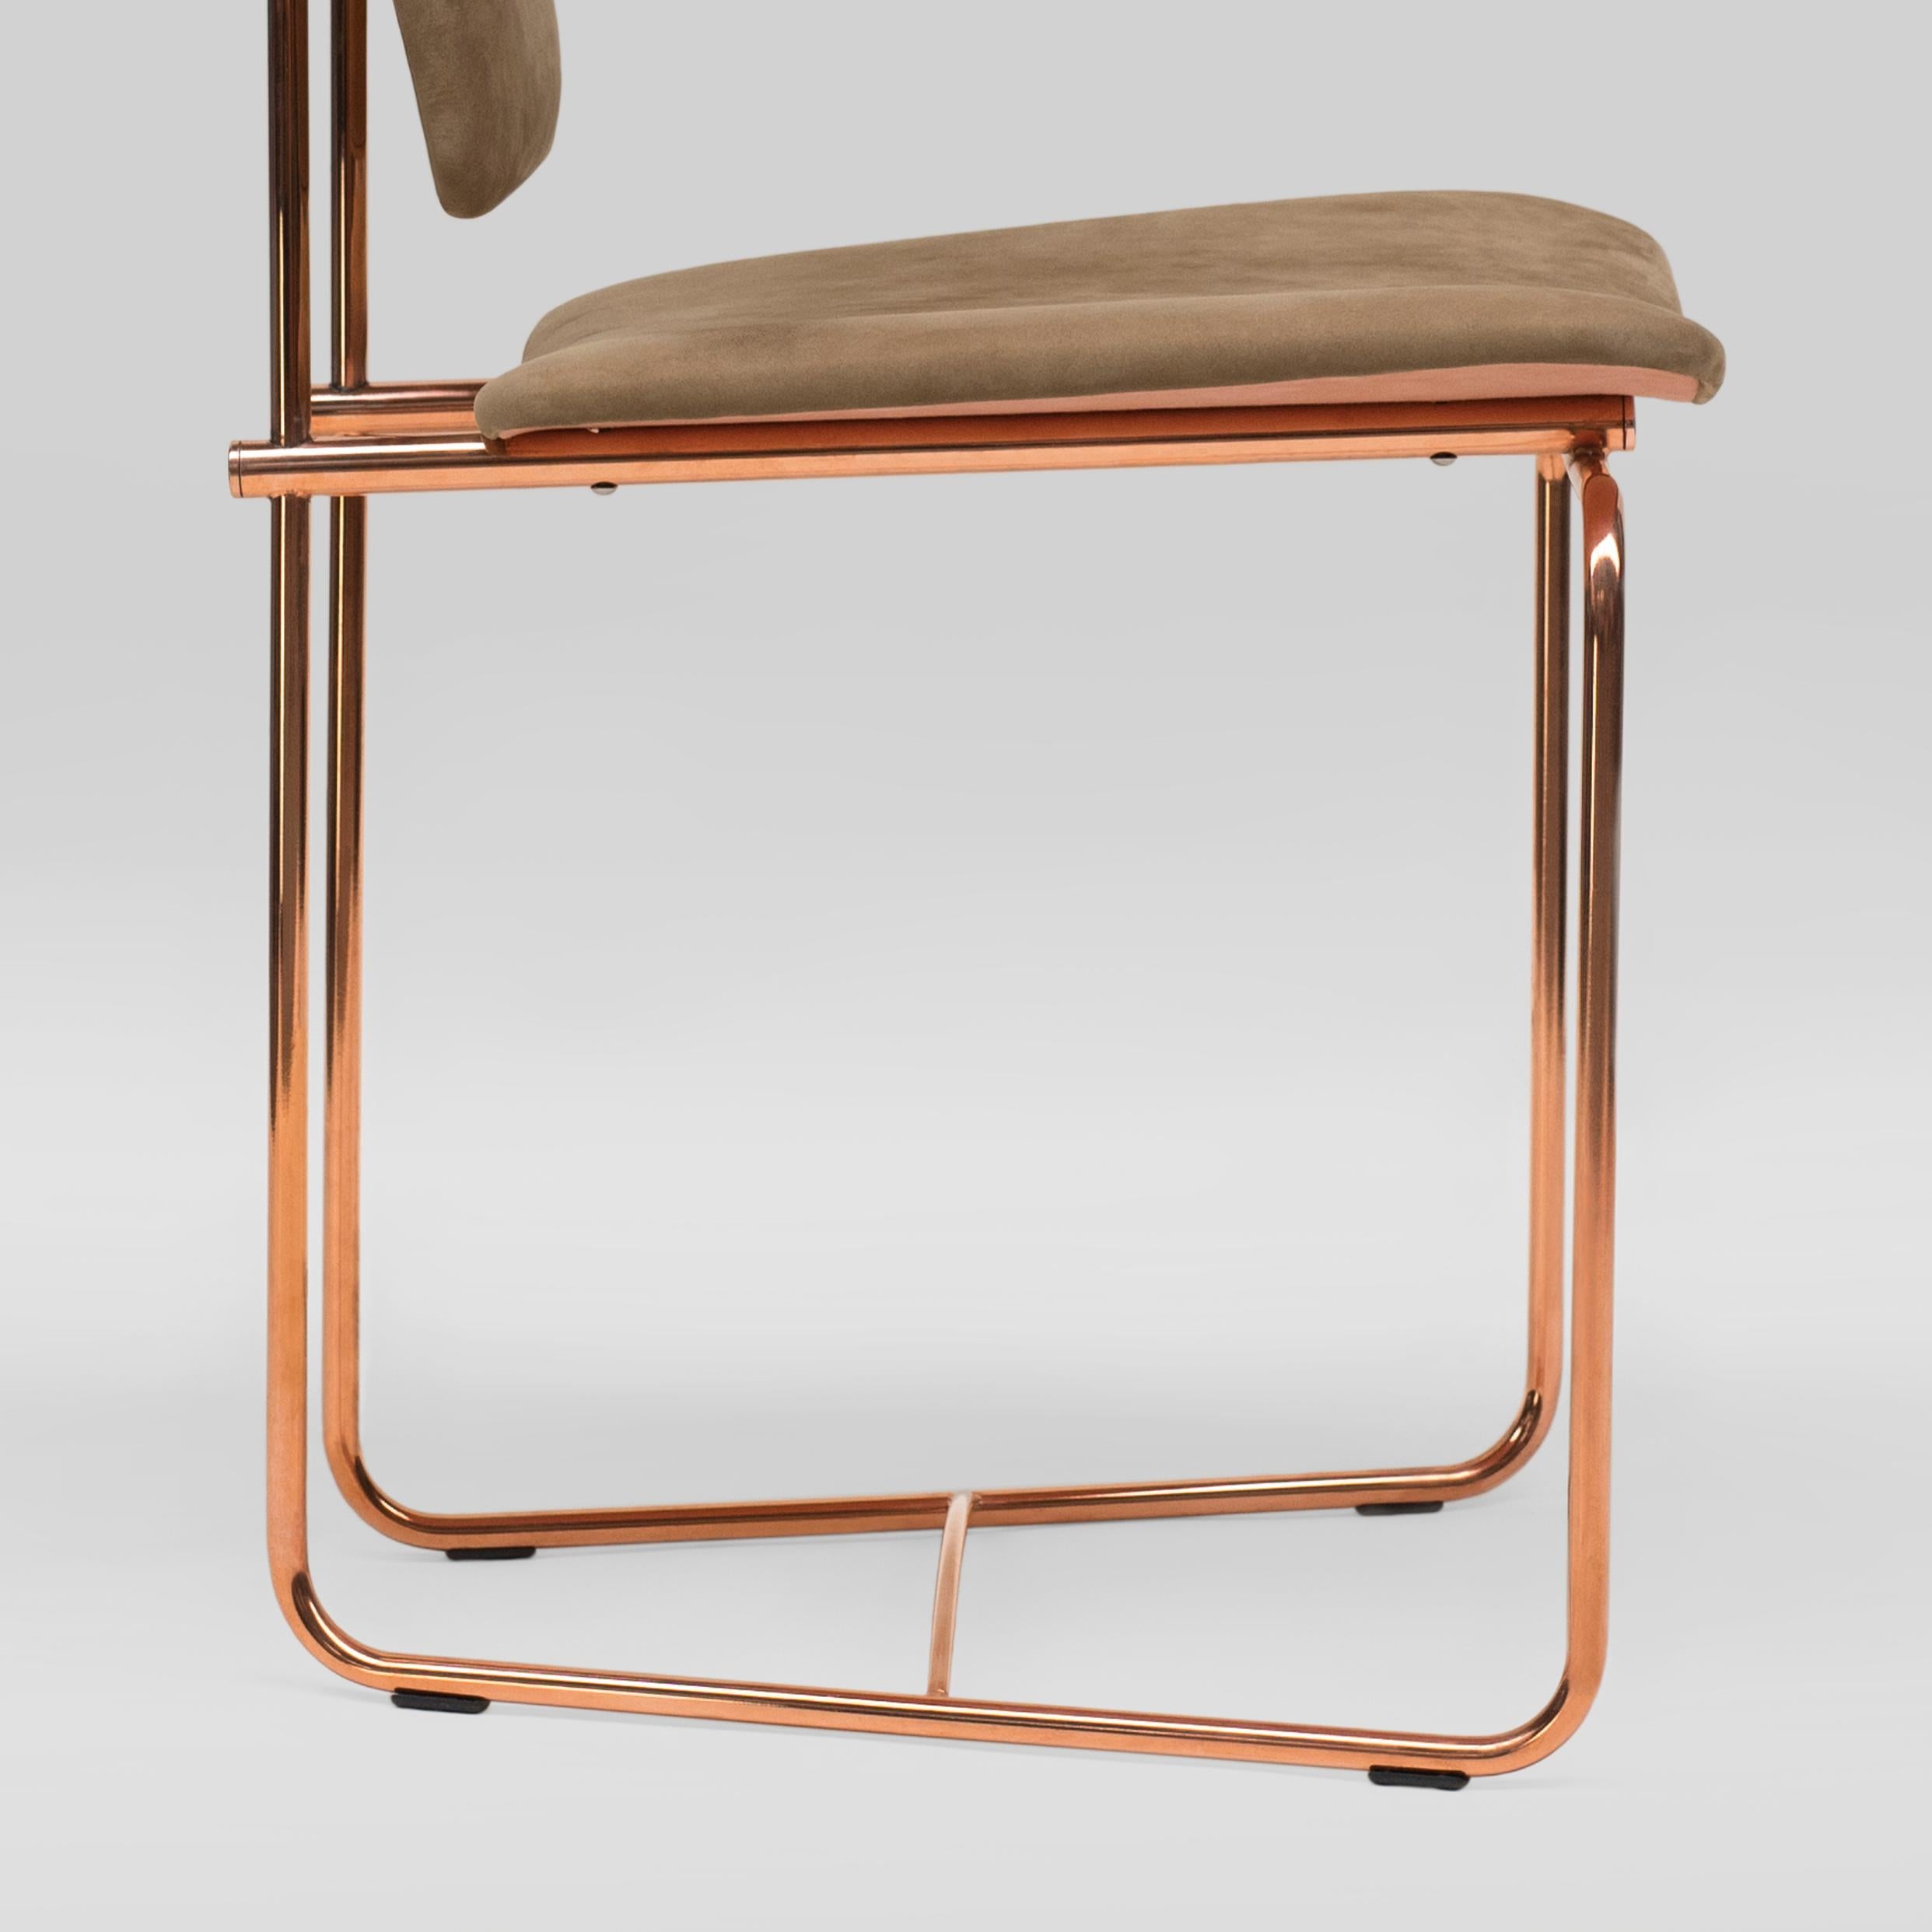 Contemporary Peter Ghyczy Chair Urban 'S02' Copper / Fabric Limited Edition